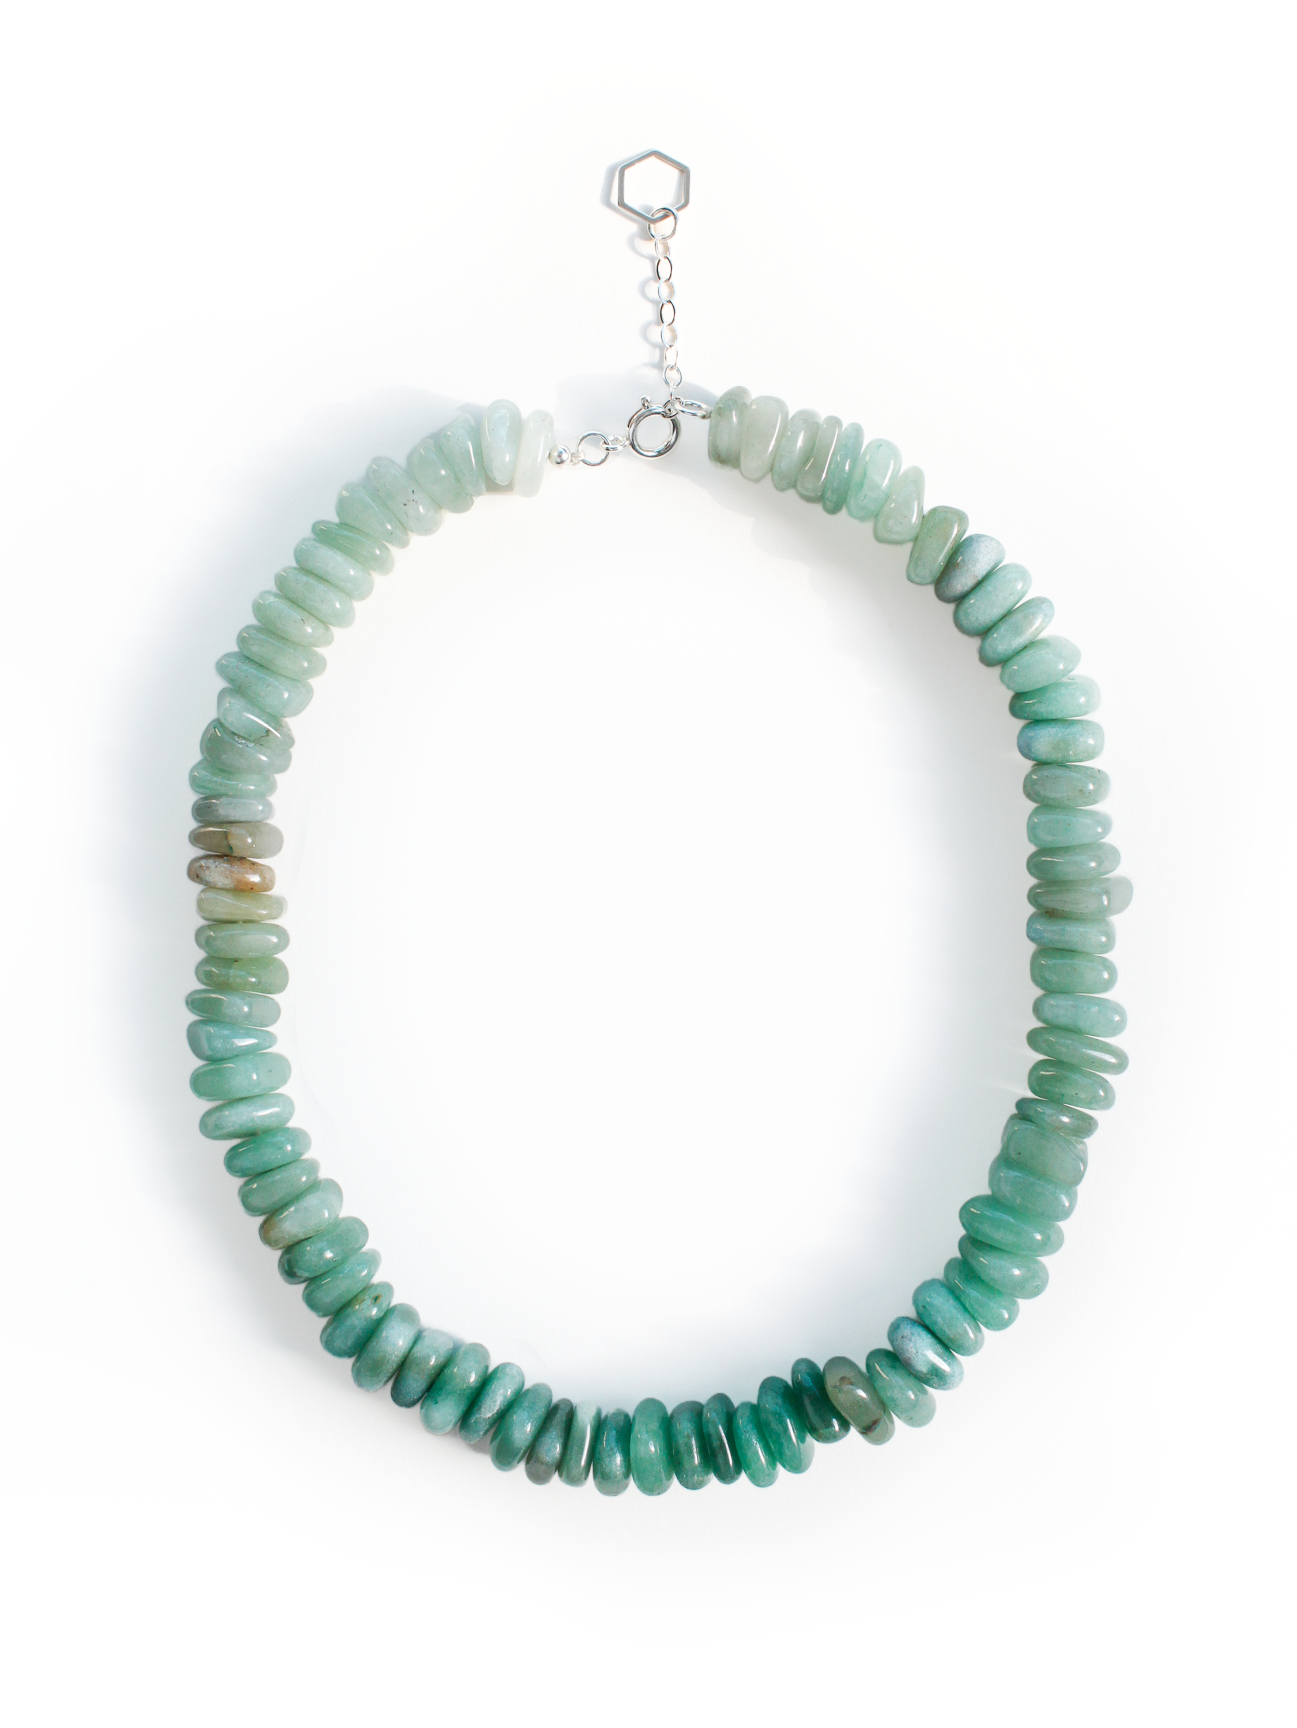 Stone Necklace - Green Gradient